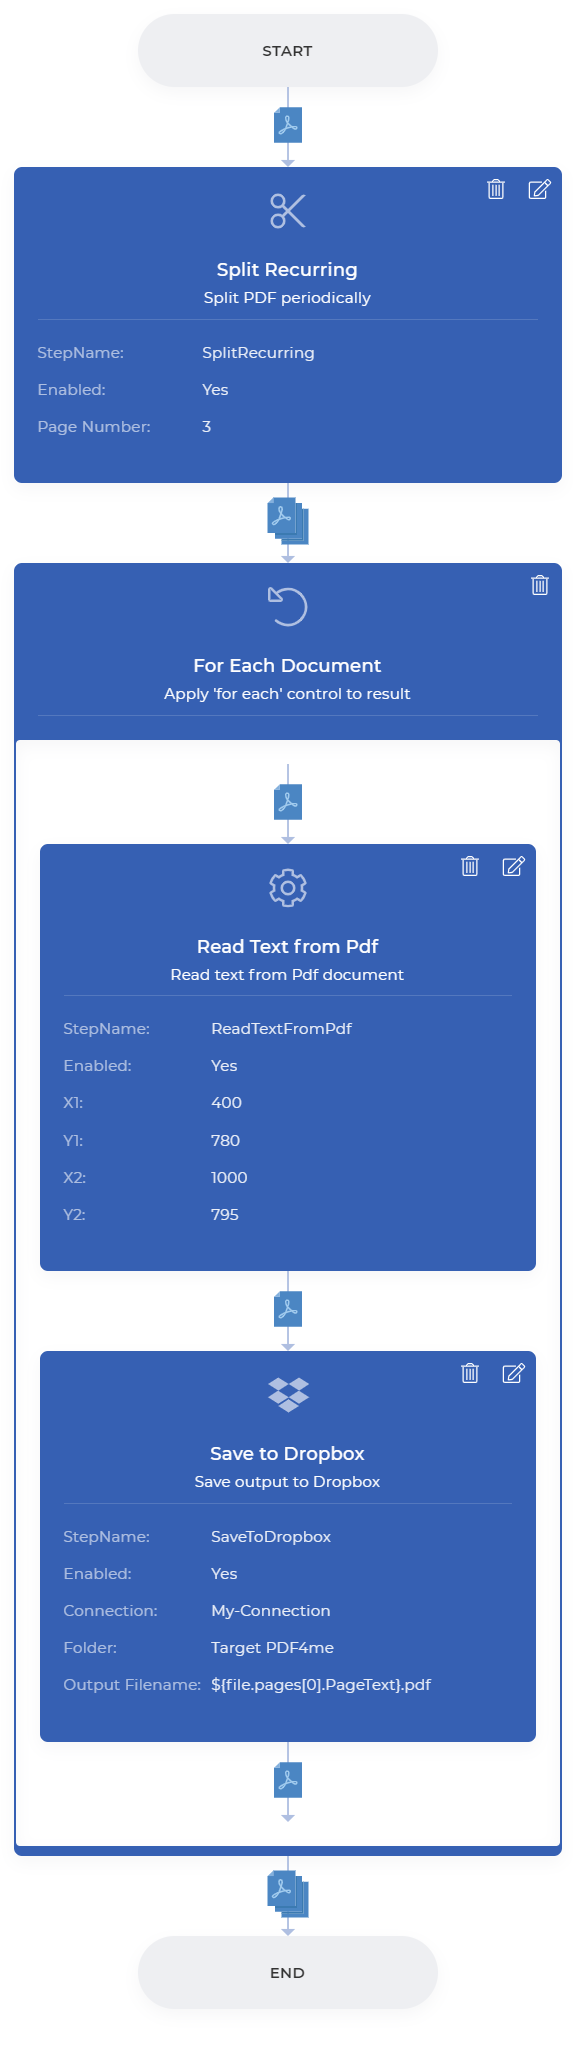 Final Read Text from PDF workflow summary